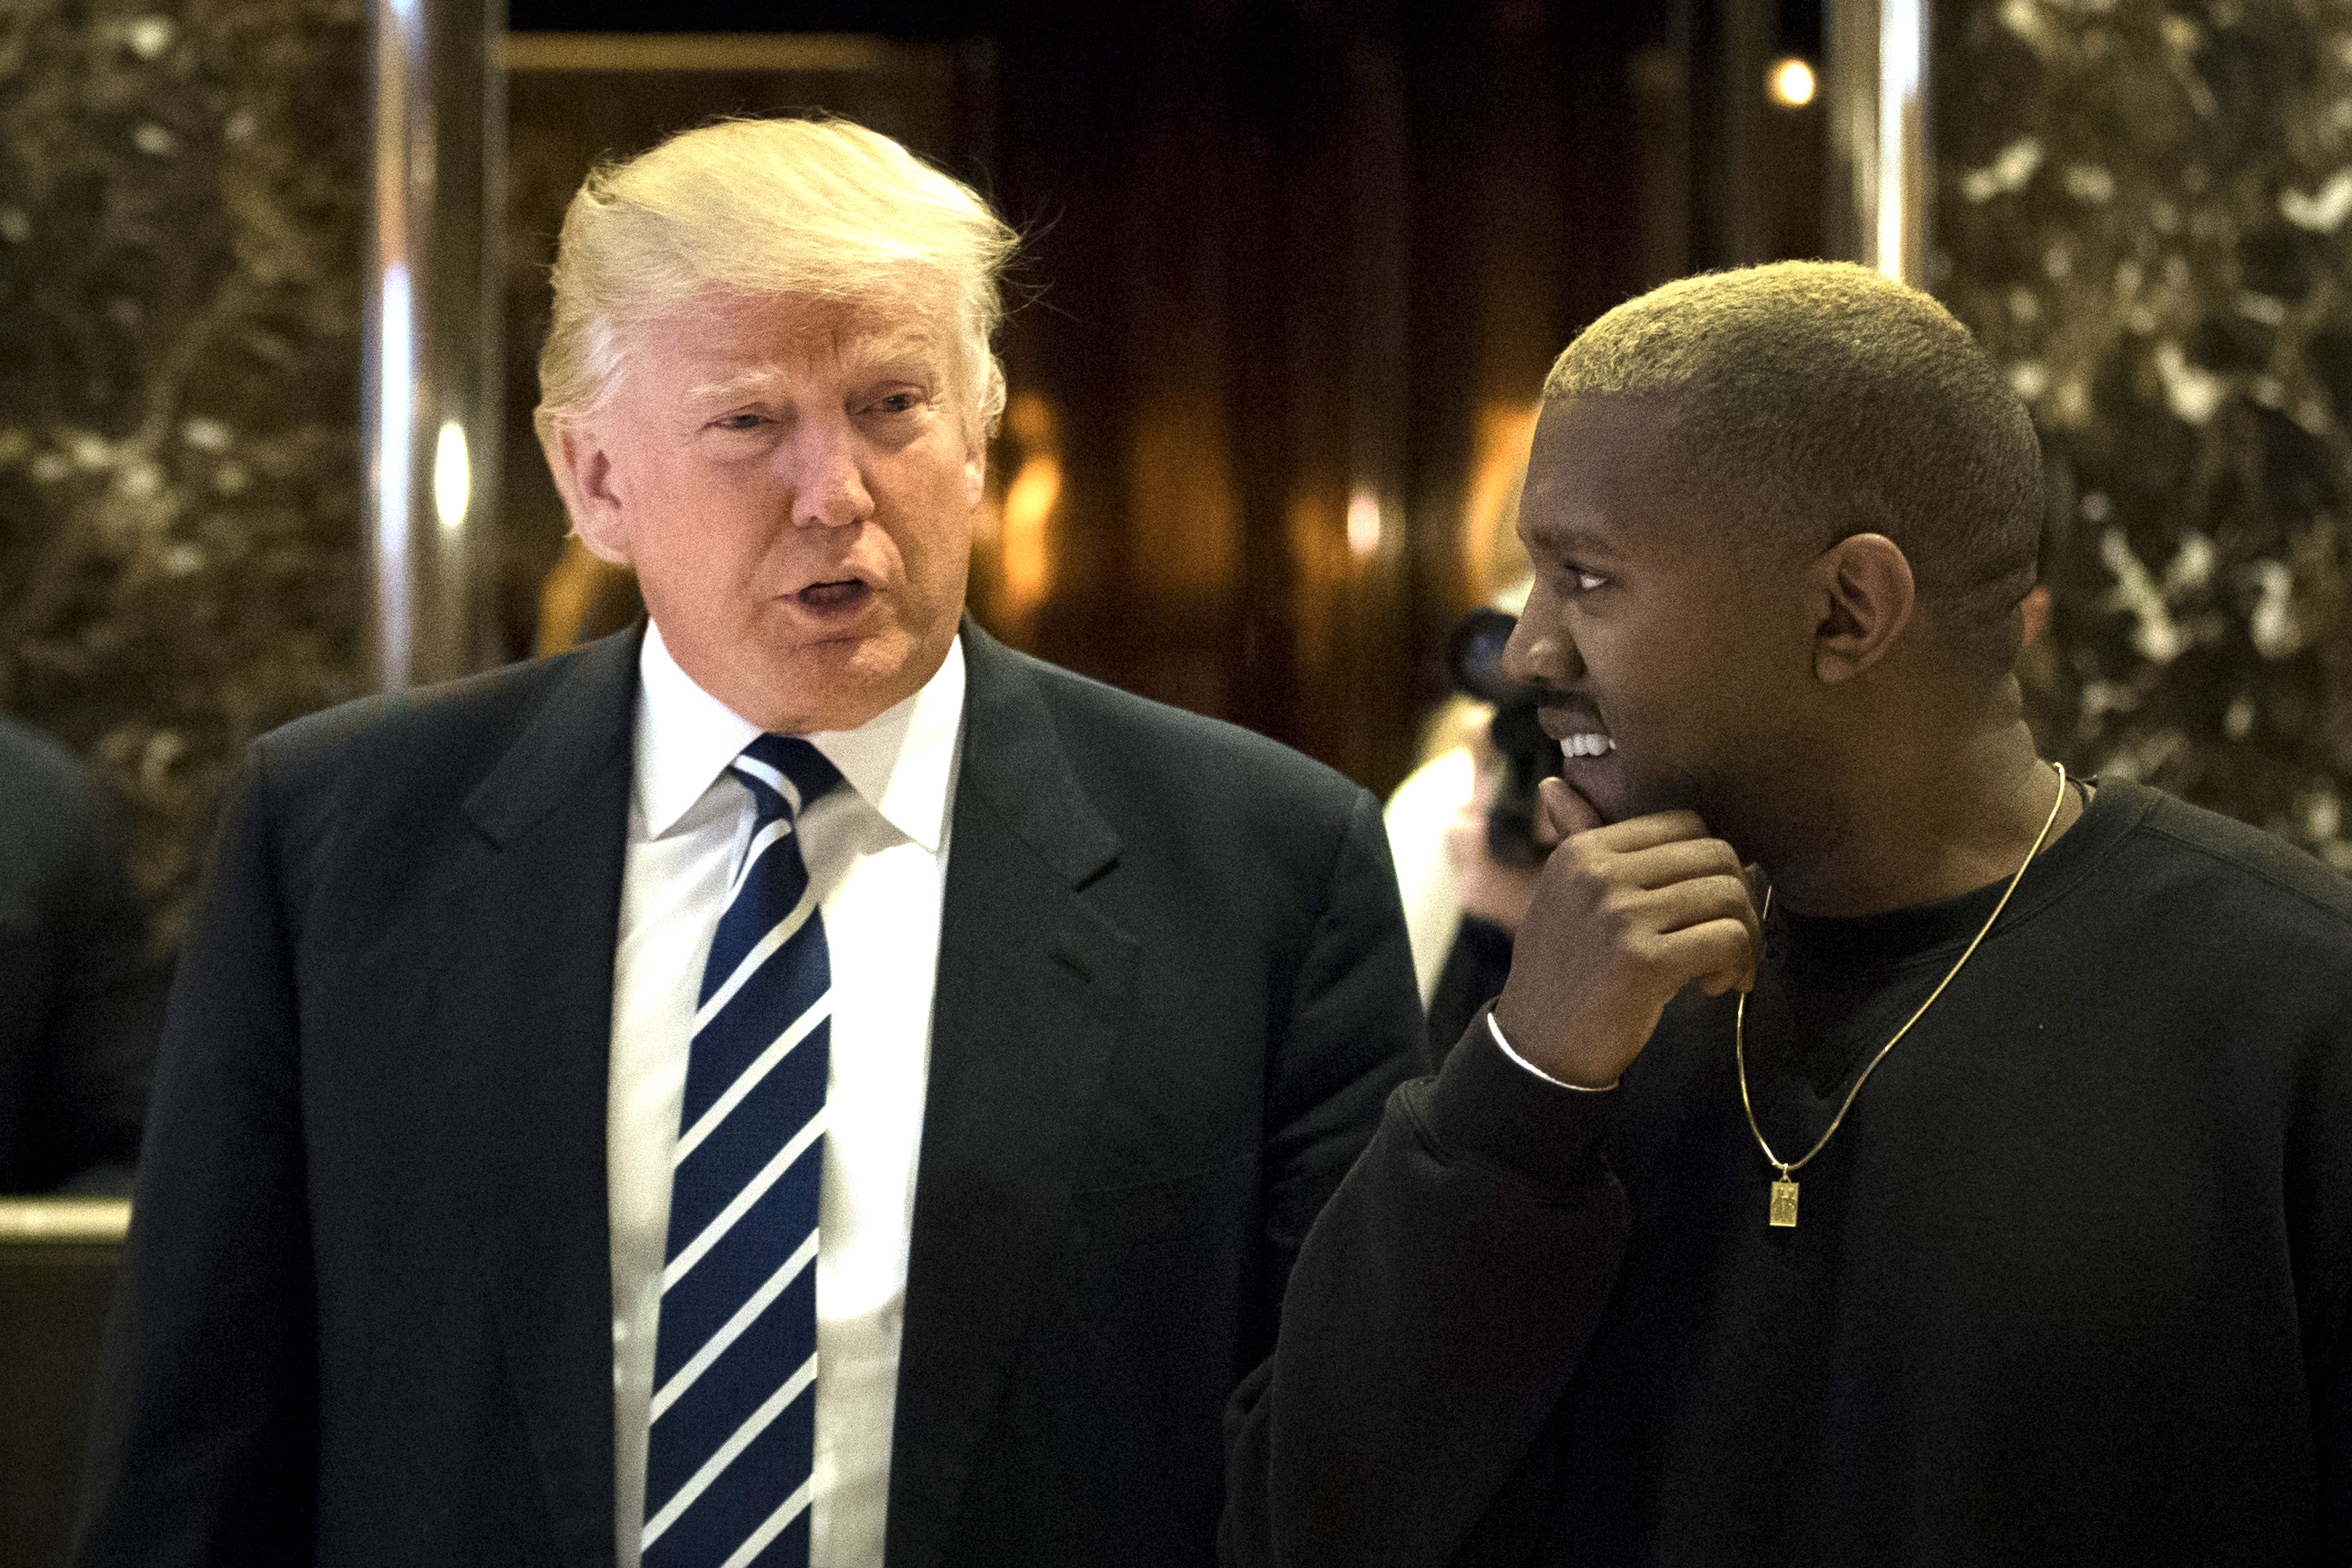 President Trump and Kanye West.